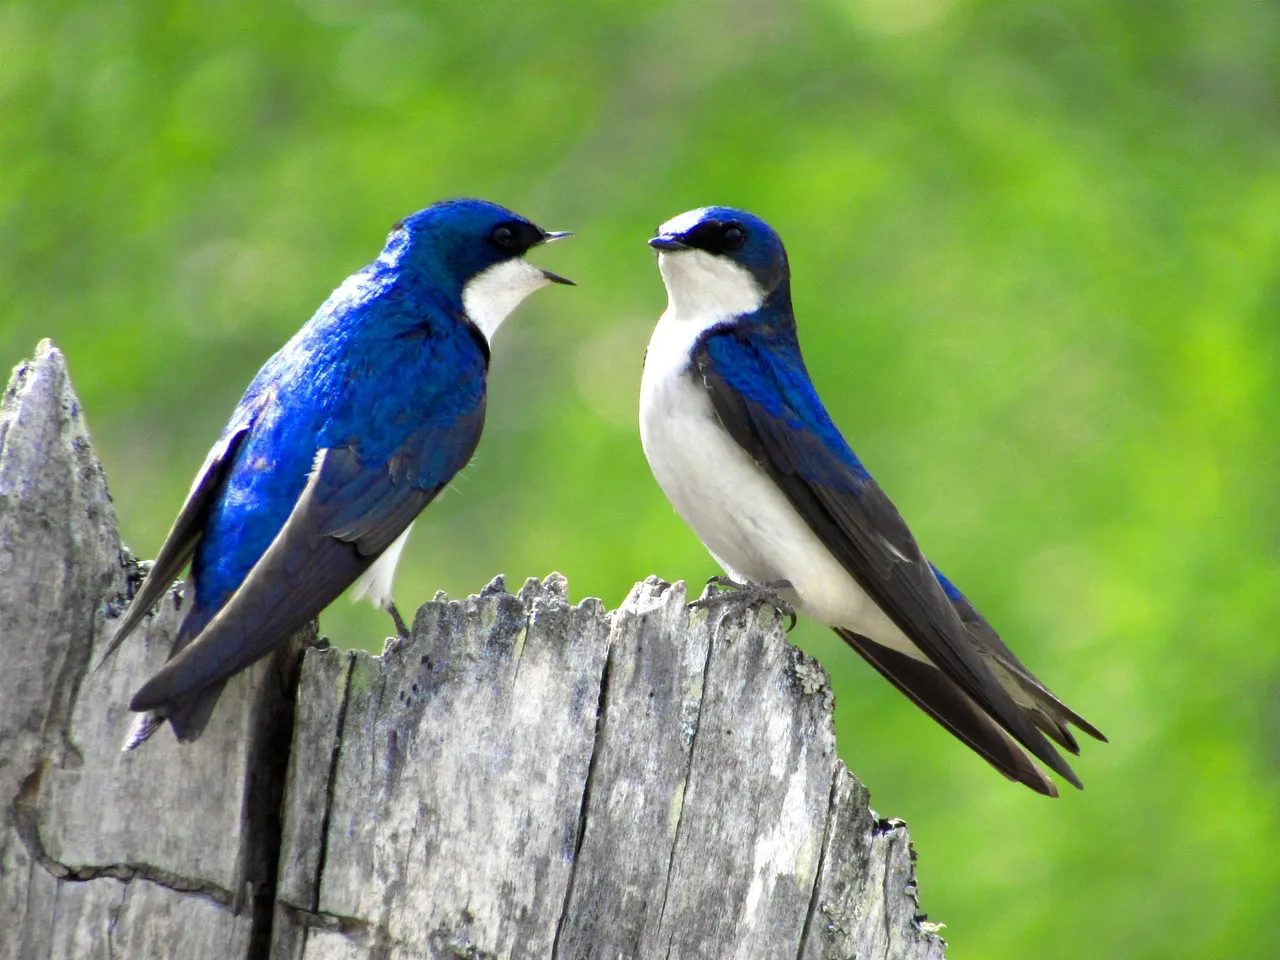 stock image of Swallows from Pixabay